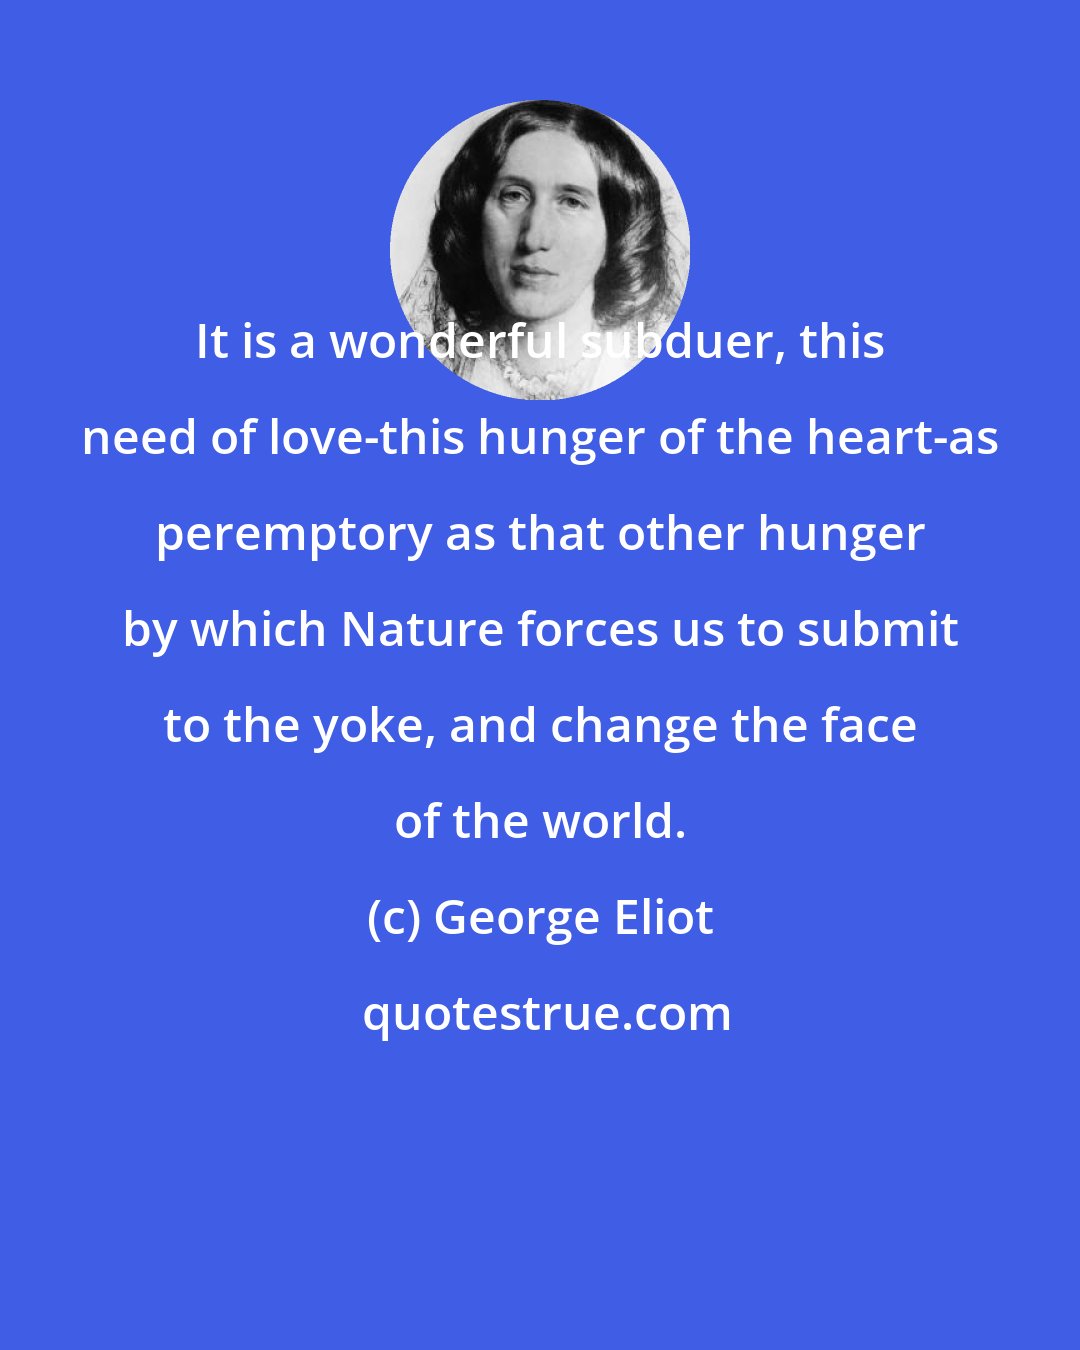 George Eliot: It is a wonderful subduer, this need of love-this hunger of the heart-as peremptory as that other hunger by which Nature forces us to submit to the yoke, and change the face of the world.